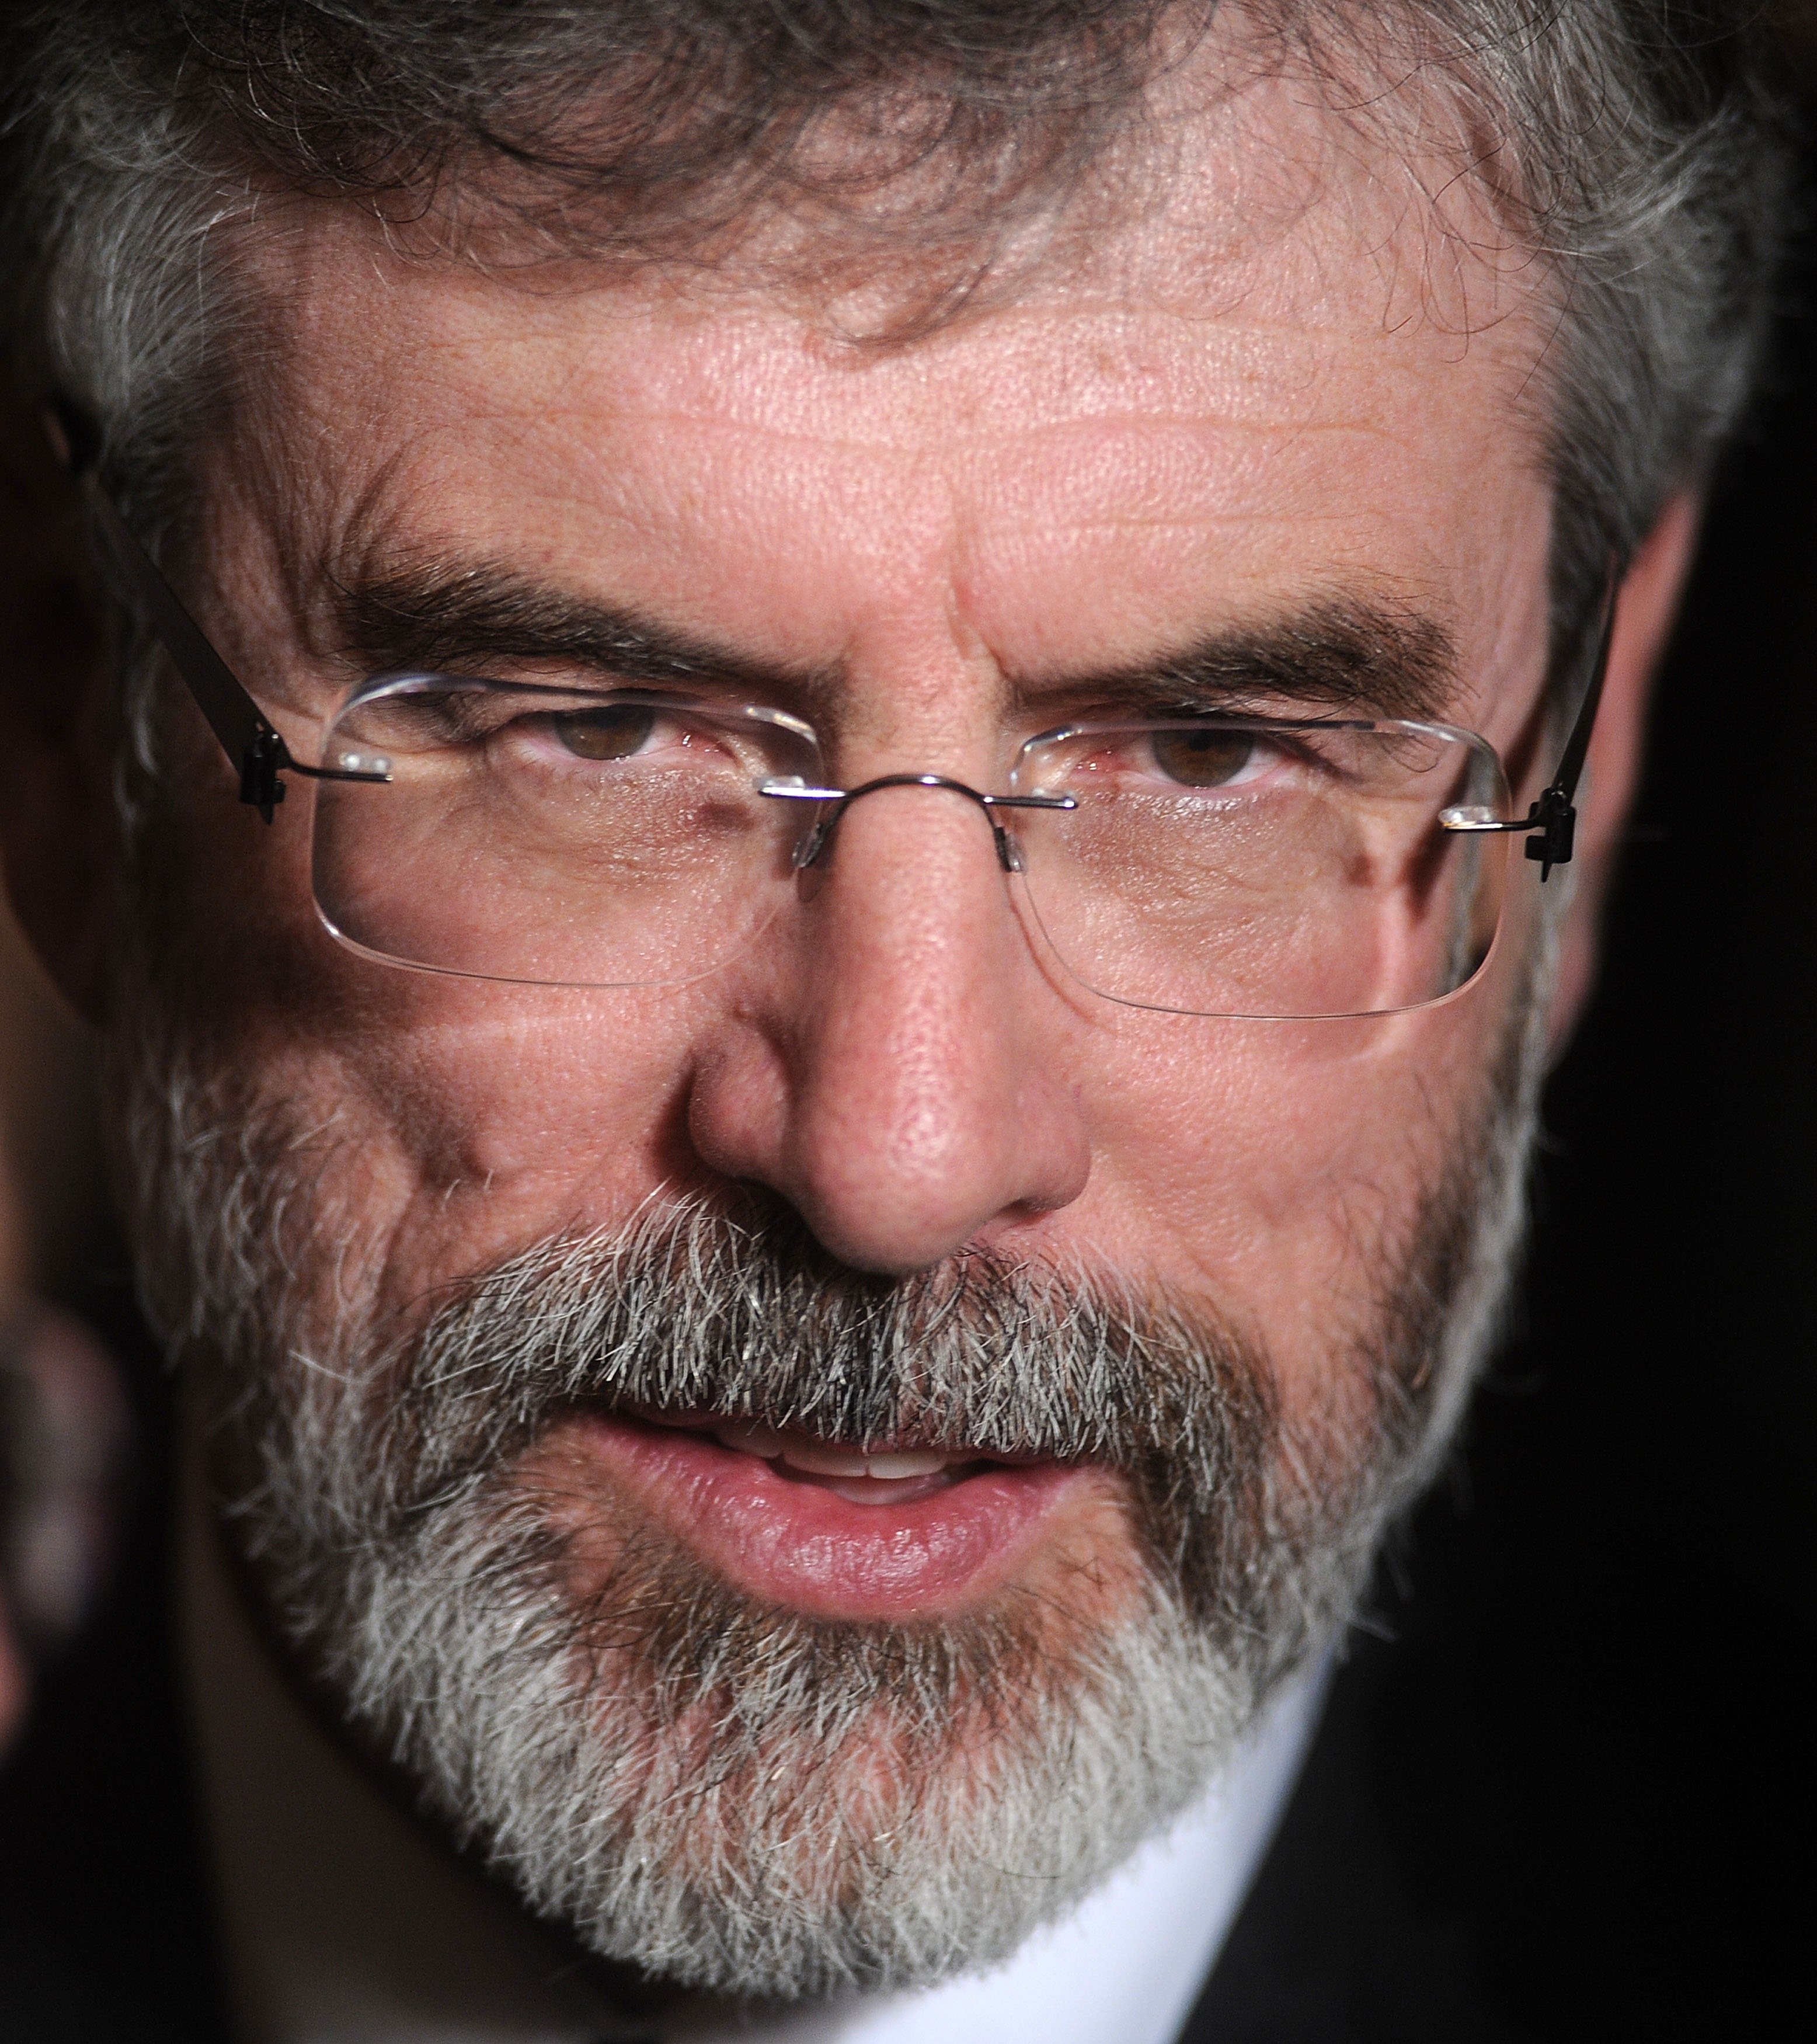 Former Sinn Féin leader Gerry Adams attends a St. Patrick's Day reception in the East Room of the White House on March 17, 2011 in Washington, DC. (Olivier Douliery&mdash;Getty Images)